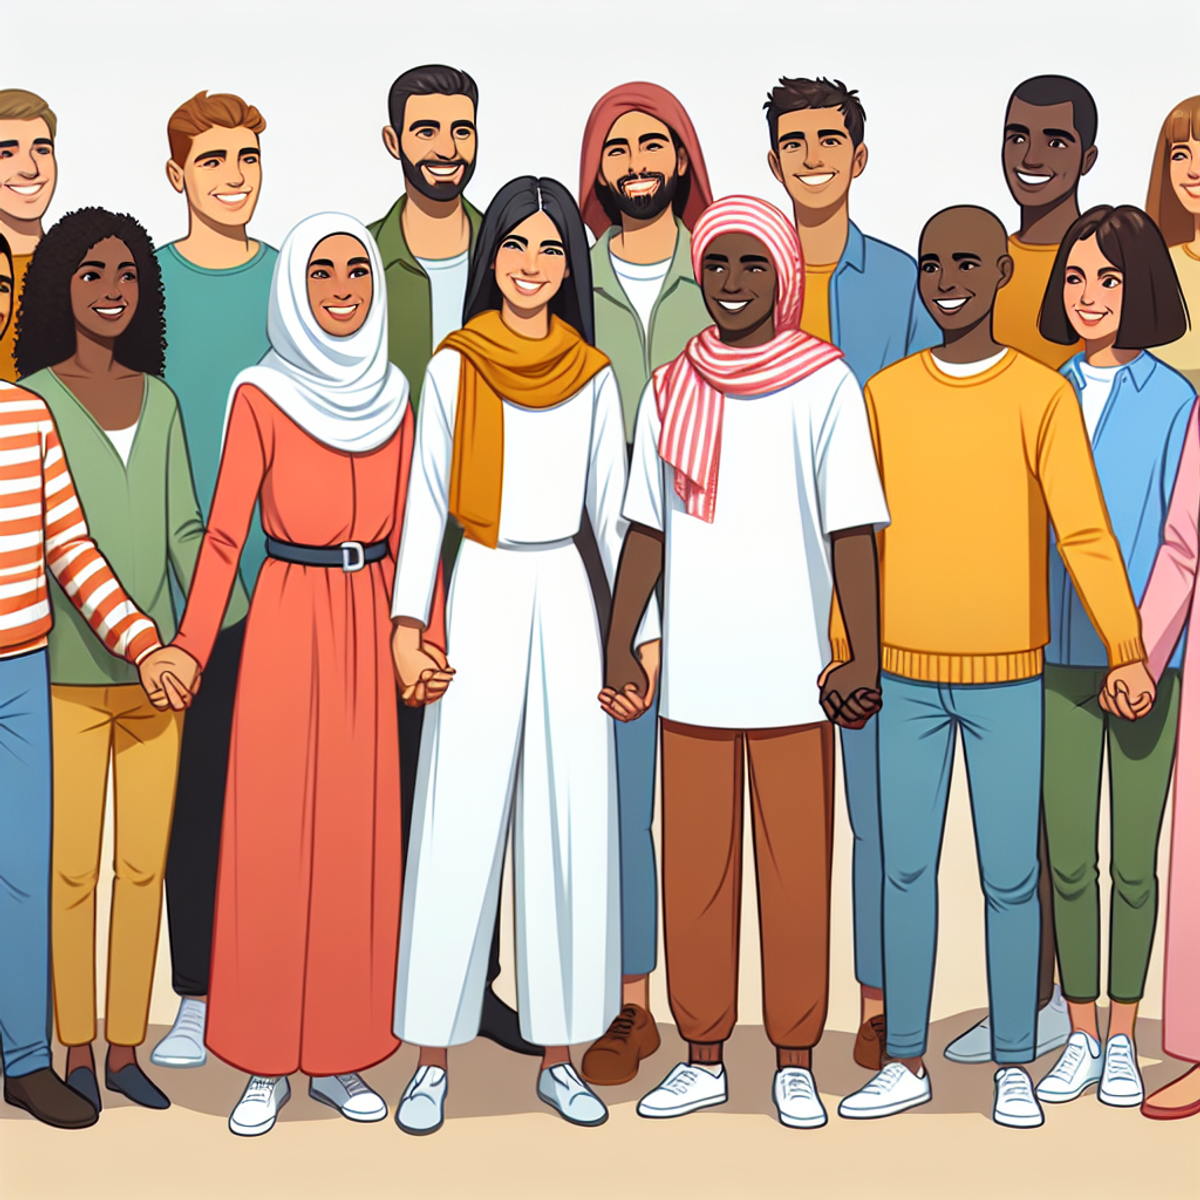 A diverse group of people from various ethnic backgrounds and genders stand together, holding hands and smiling in solidarity.